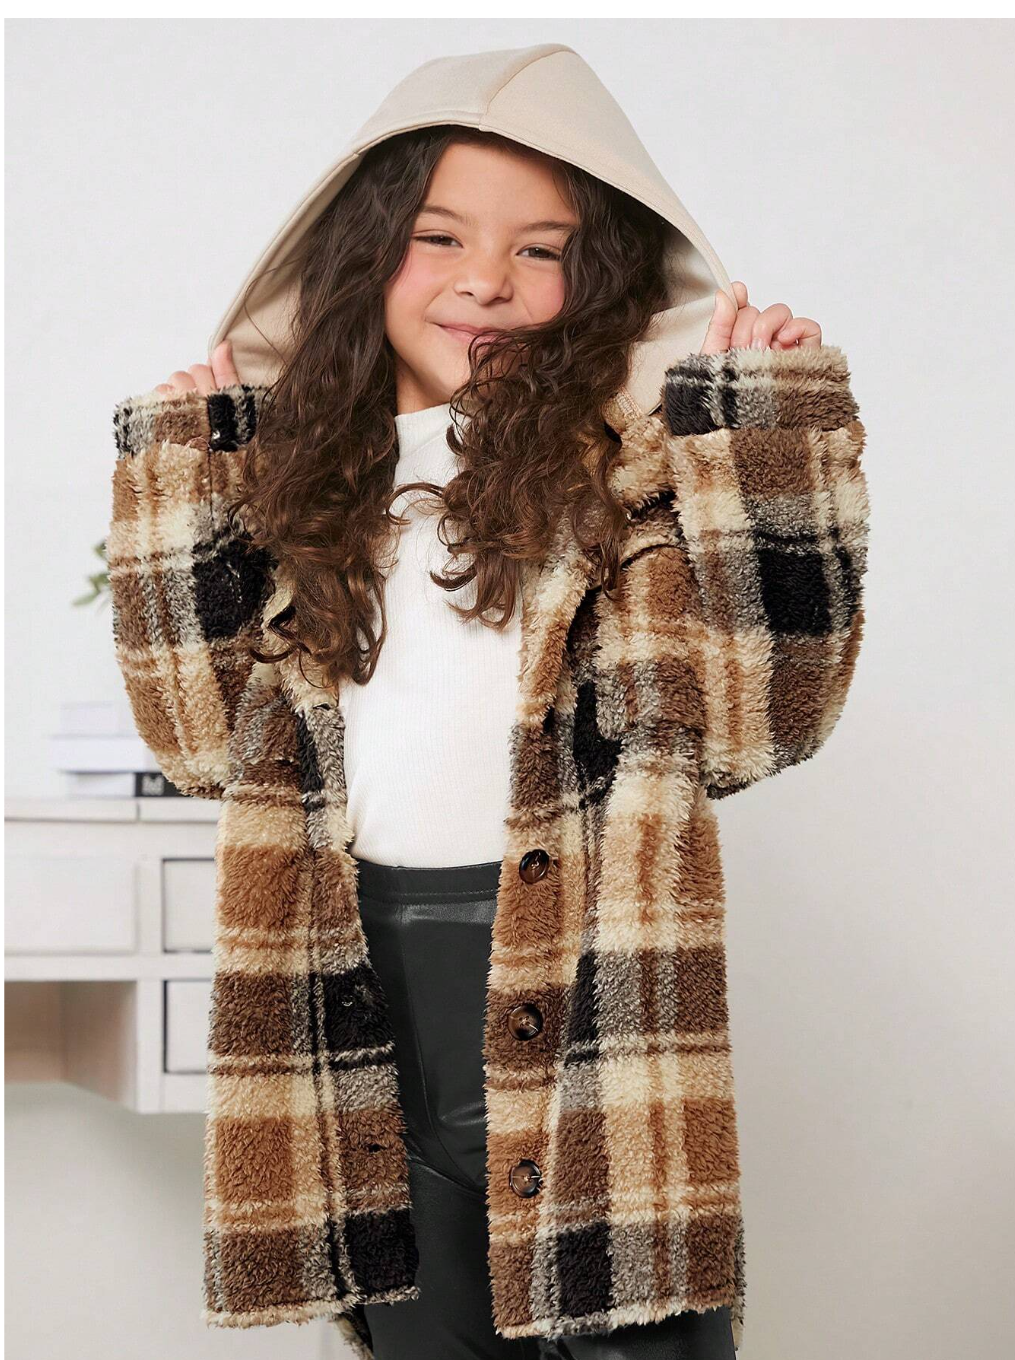 Plaid Princess: Kids Cooltwn Unveils the Irresistibly Chic Hooded Teddy Coat for Tween Girls – Snuggle up in Style!